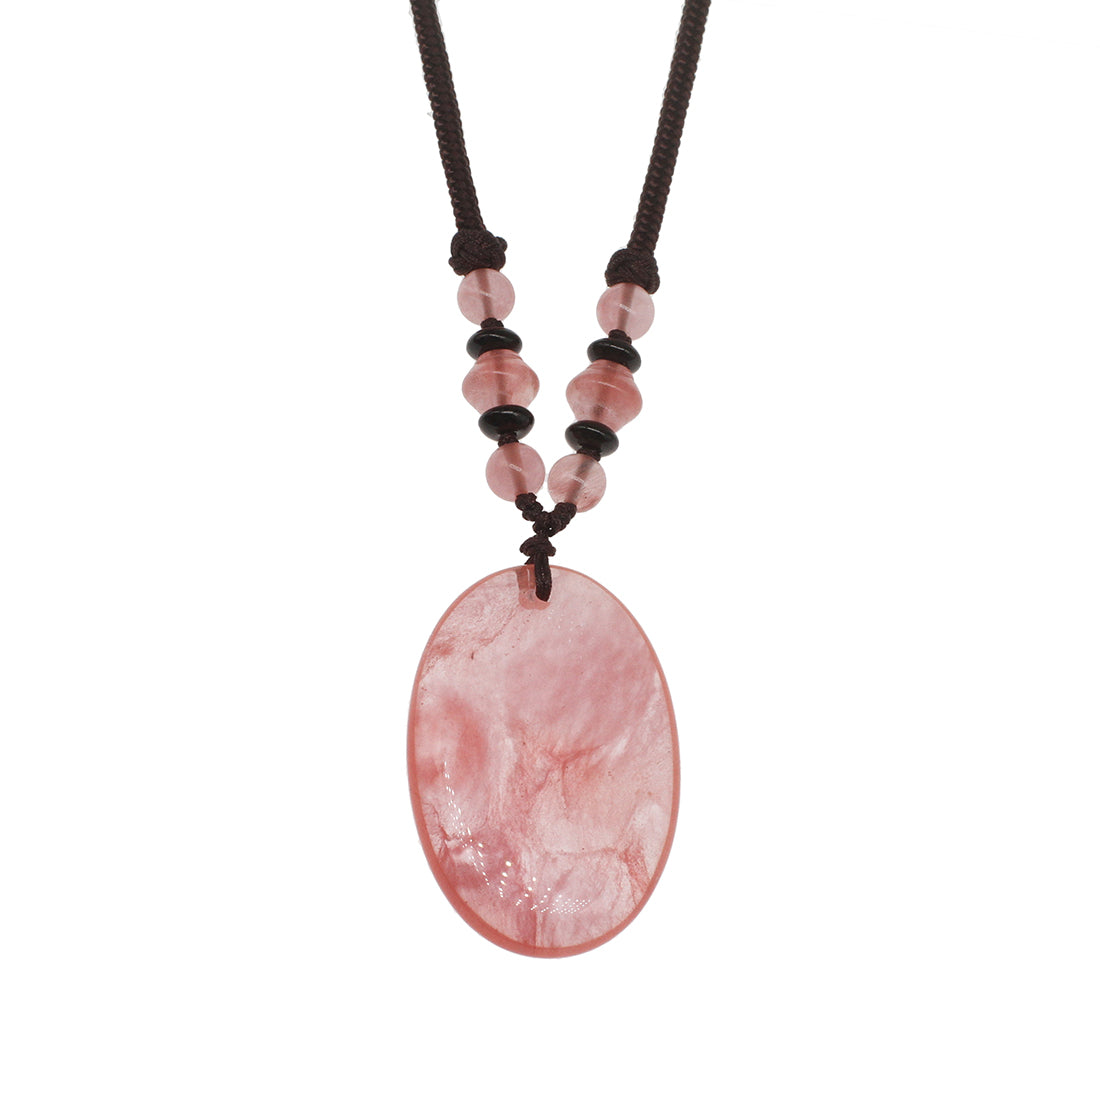 Oval Rose Quartz Gemstone Pendant with Necklace - 42x28x6mm - Length 12 inch - 28g - NEW1021